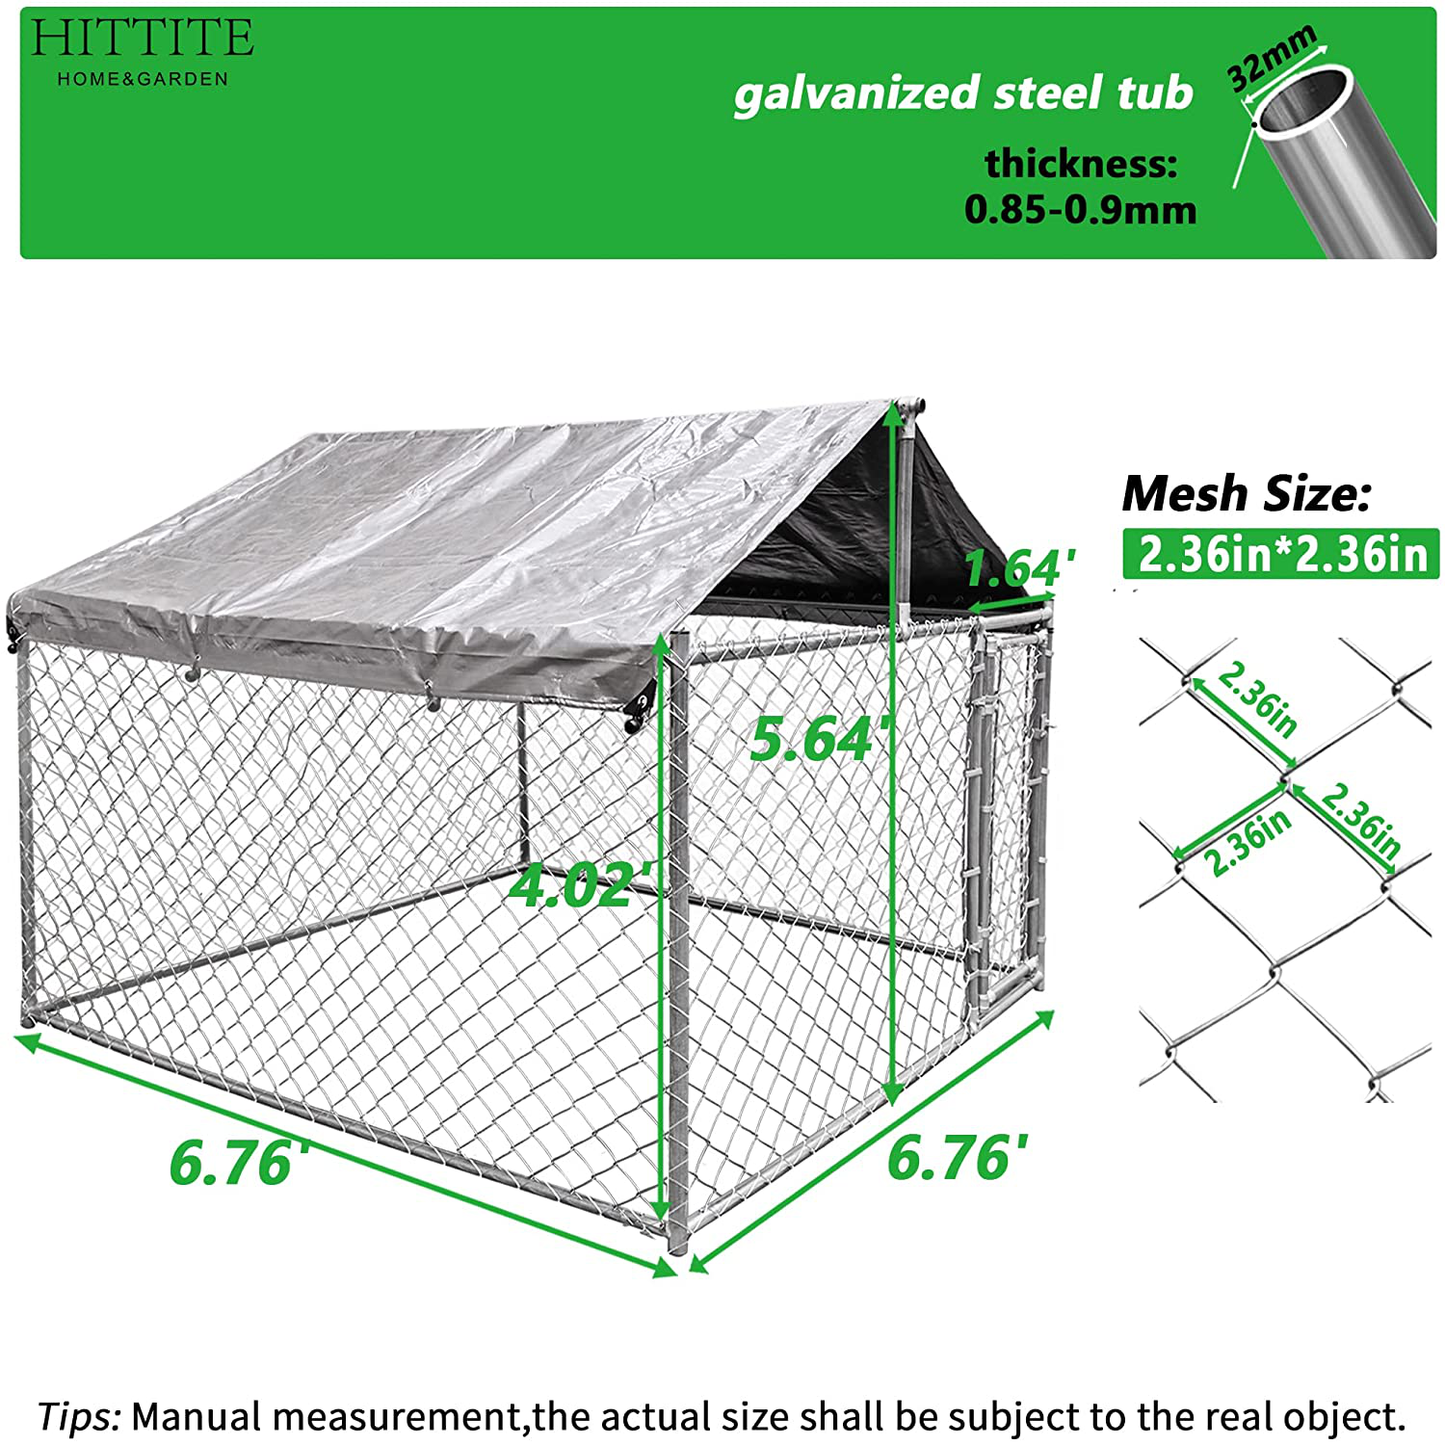 HITTITE Outdoor Chain Link Dog Kennel for Small to Medium Dogs 6.76'L X 6.76'W X 5.64'H, Anti-Rust Heavy Duty Dog Pen with Lockable Dog Gate and Uv-Resistant Waterproof Cover for Backyard.